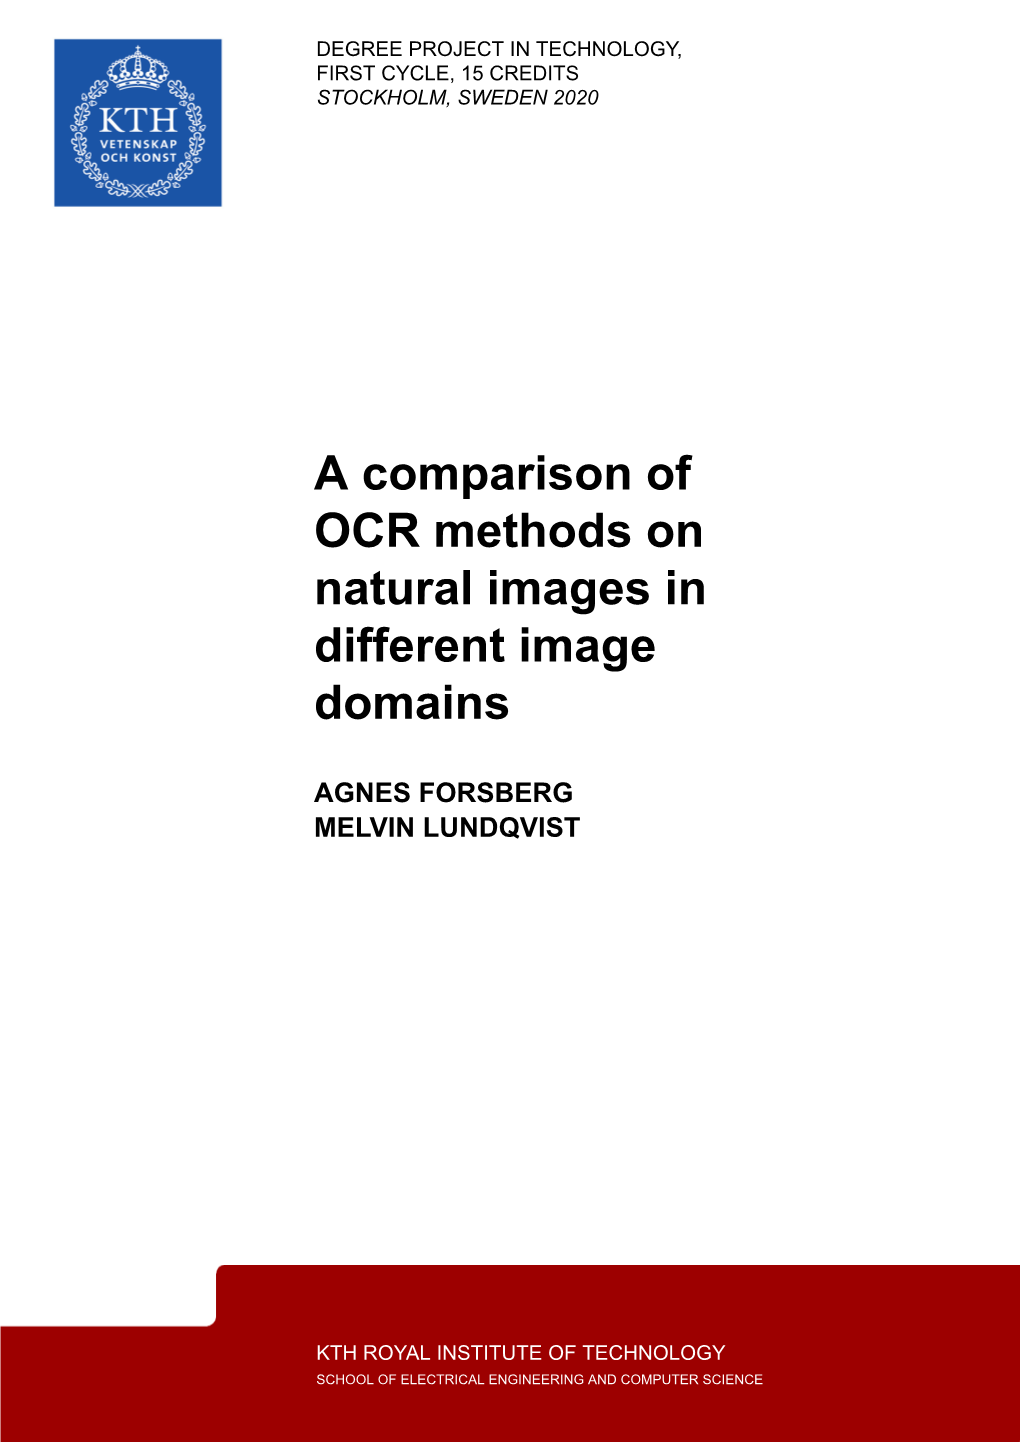 A Comparison of OCR Methods on Natural Images in Different Image Domains